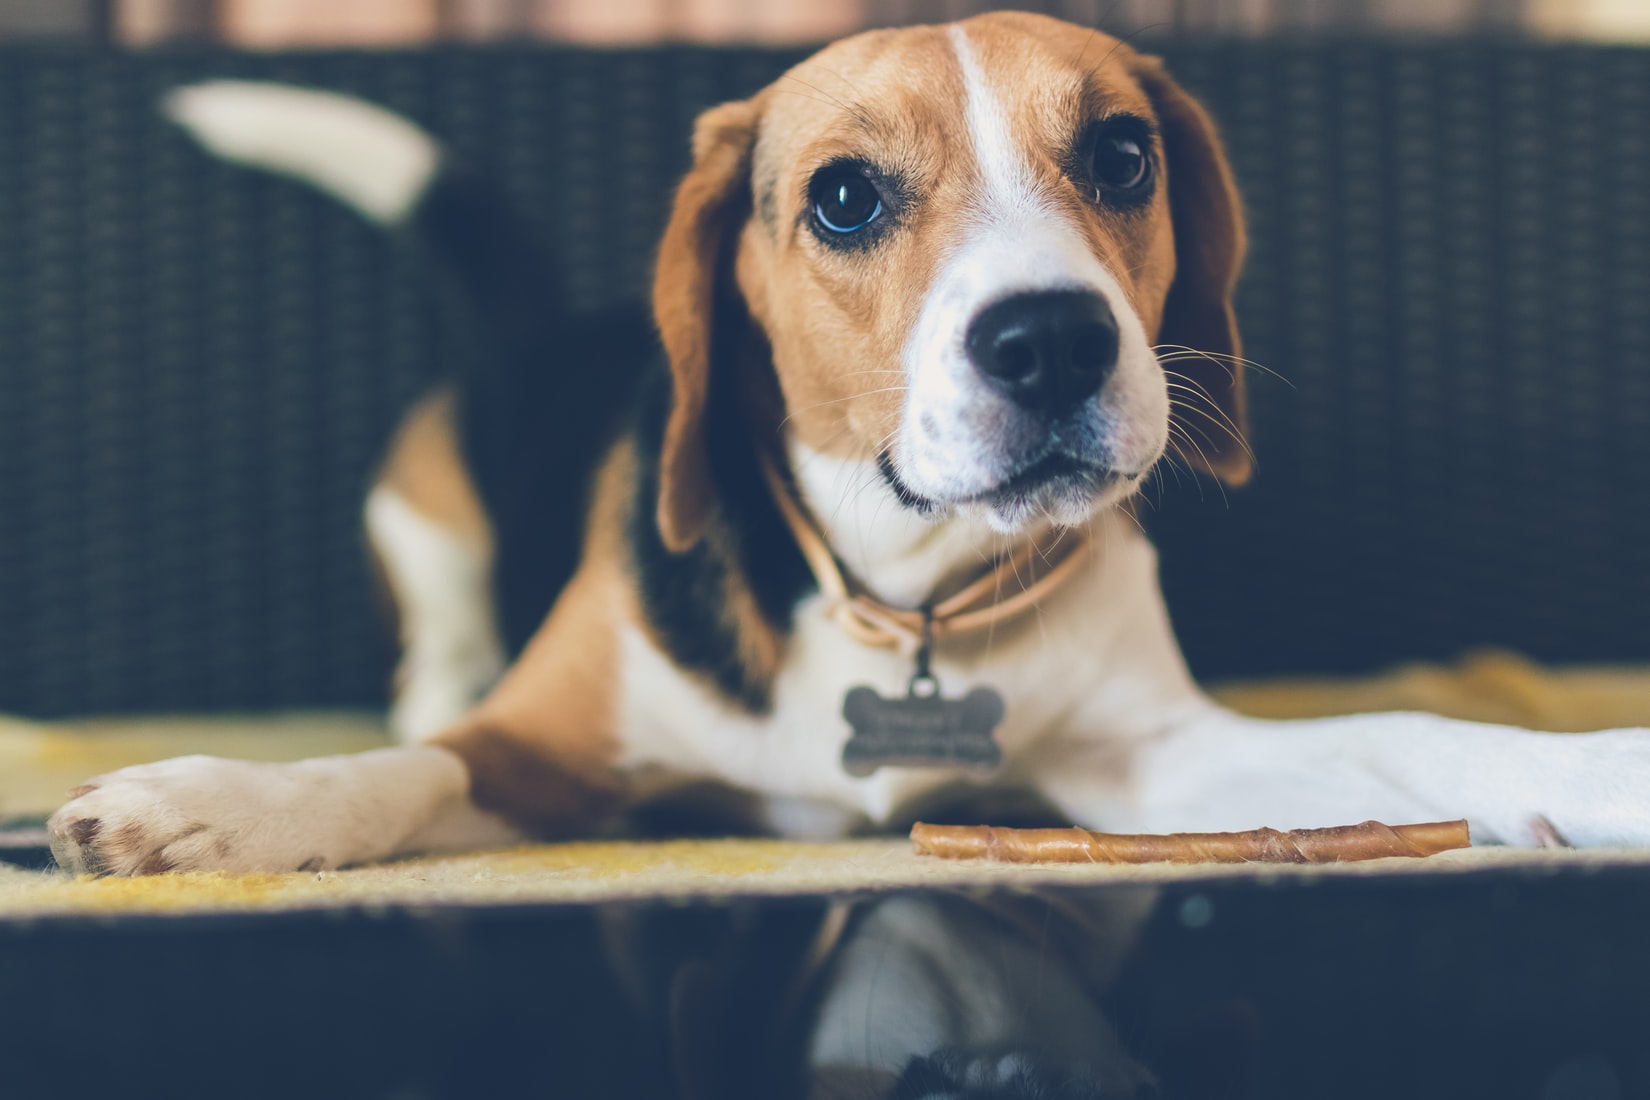 A Beagle lying on top of the table